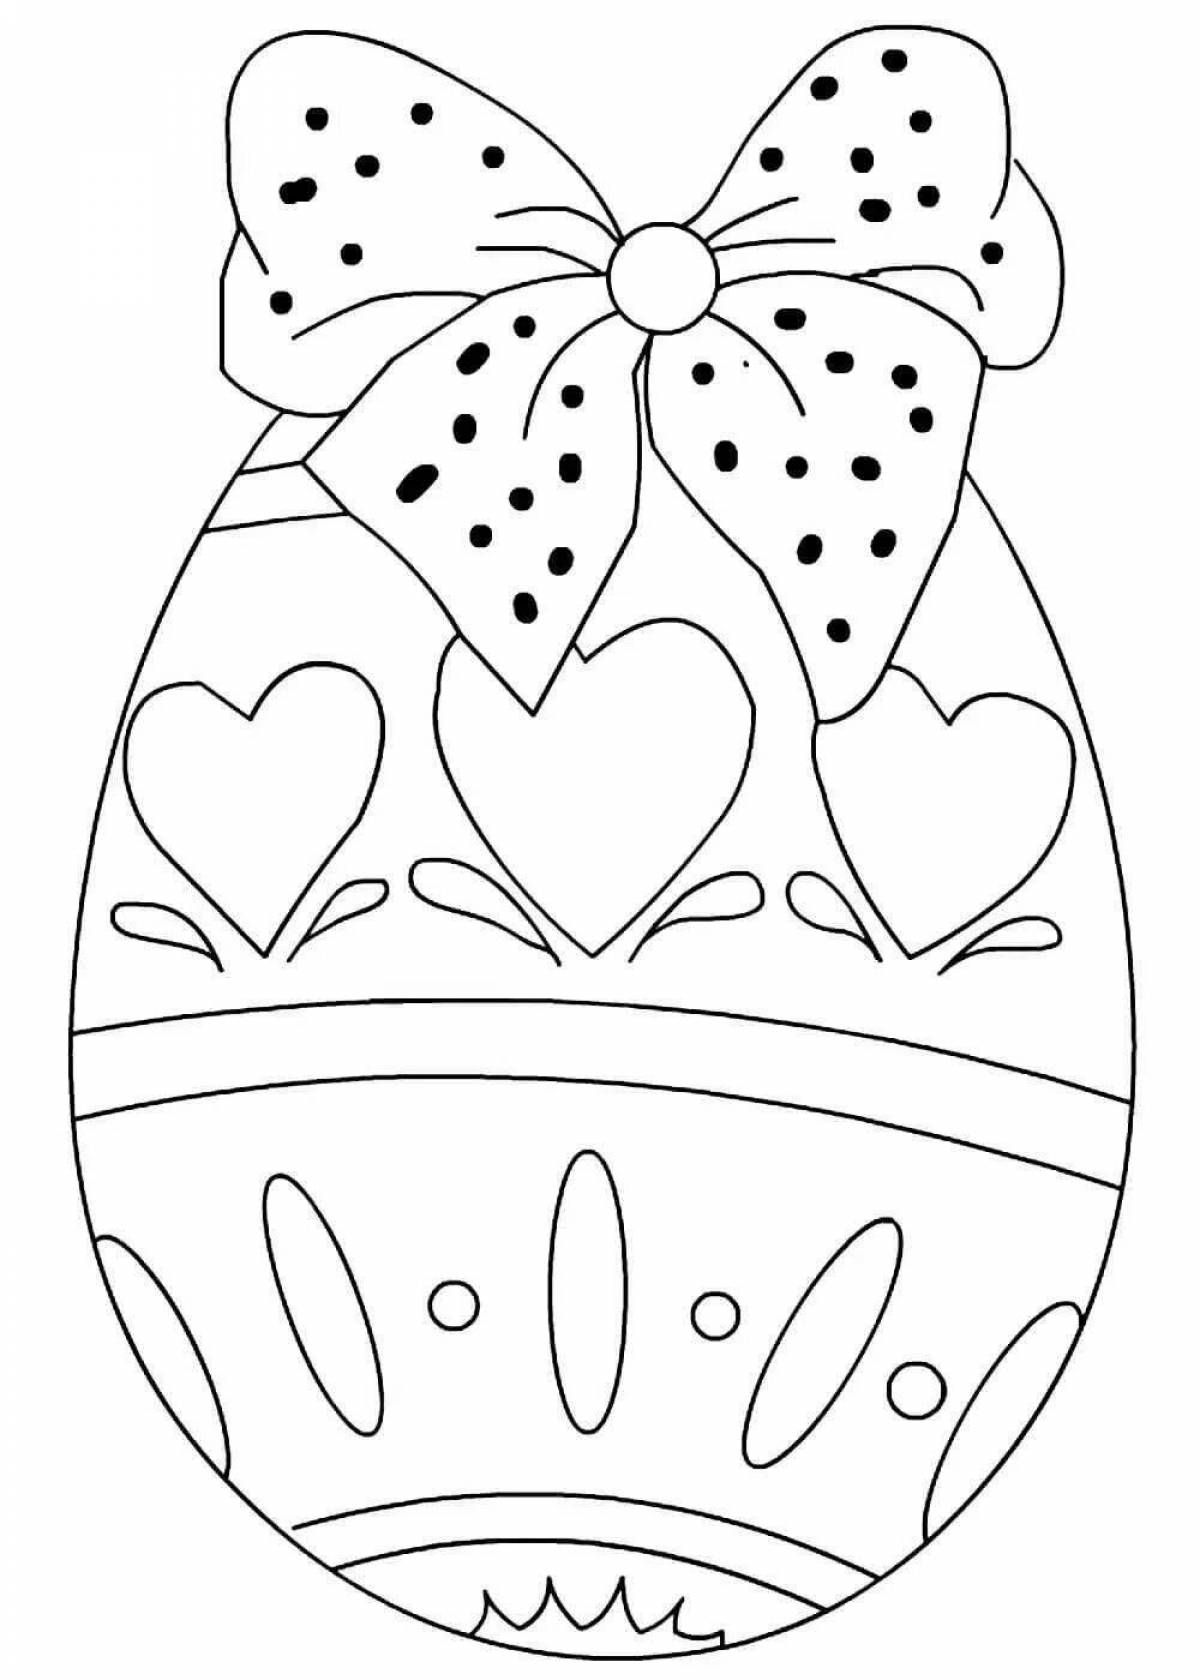 Playful easter egg coloring page for kids